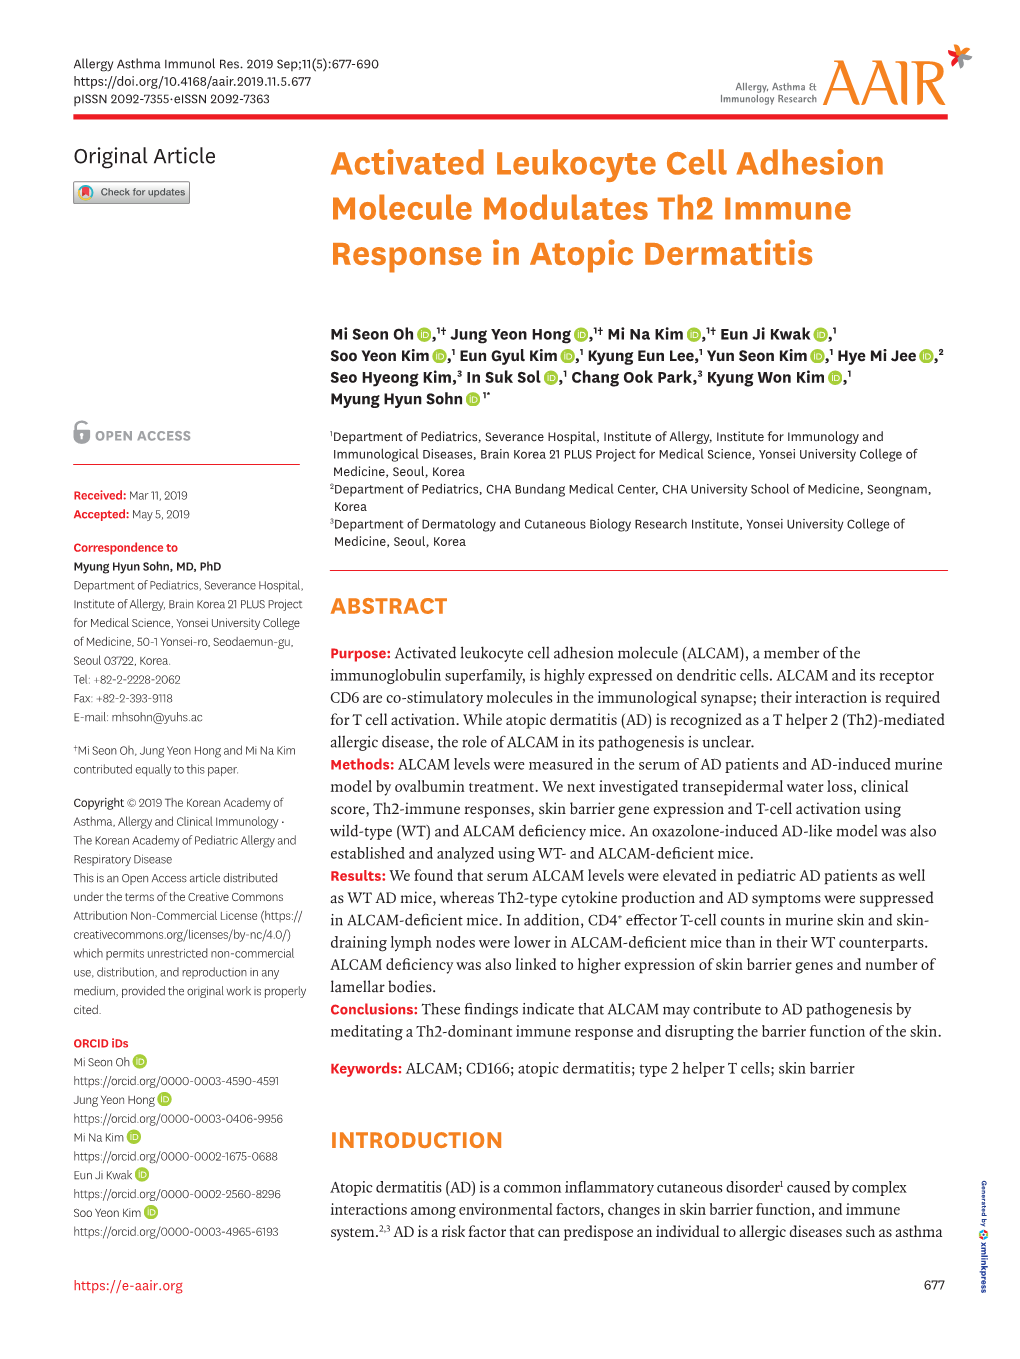 Activated Leukocyte Cell Adhesion Molecule Modulates Th2 Immune Response in Atopic Dermatitis